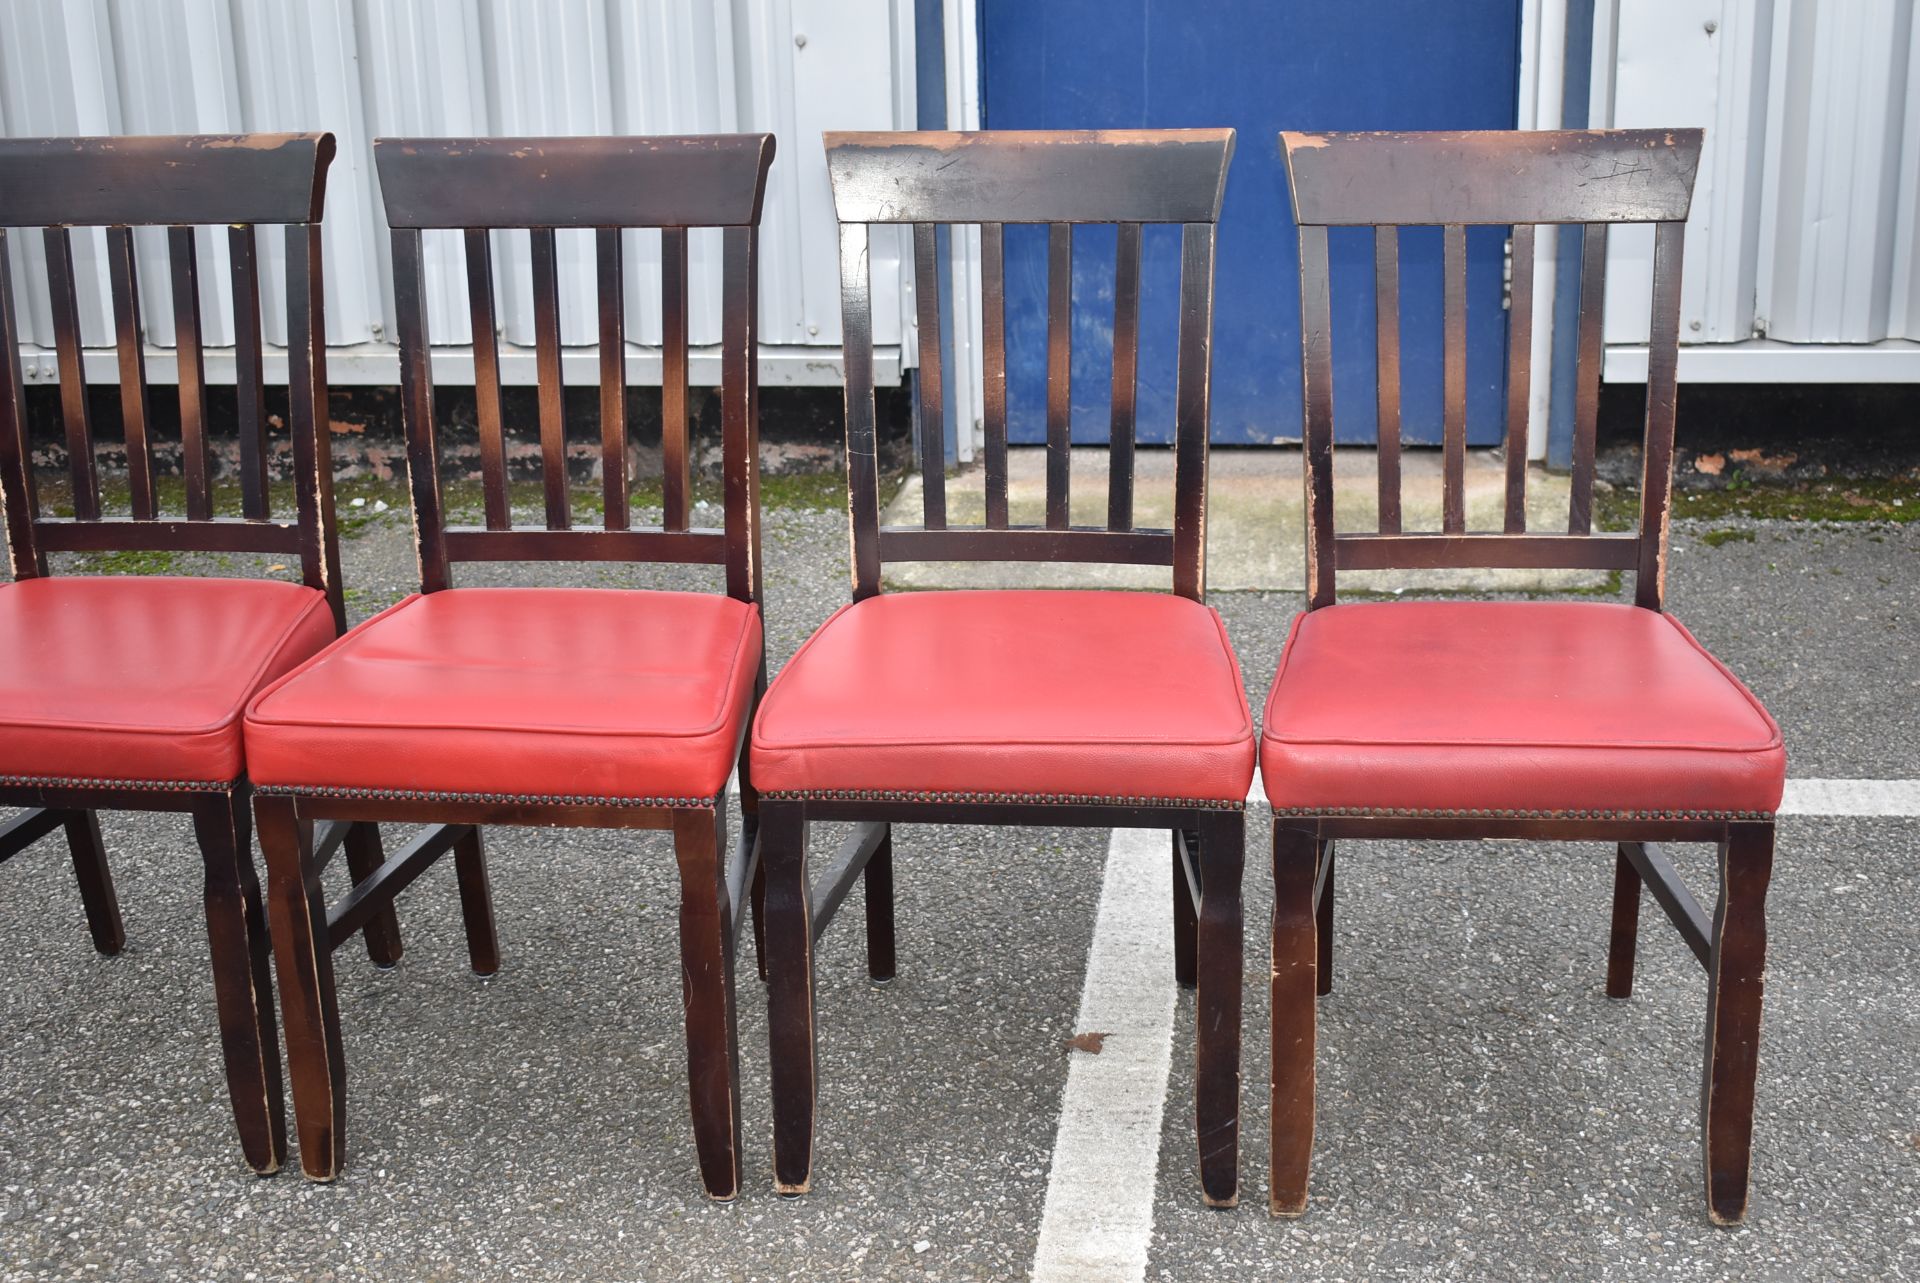 8 x Restaurant Dining Chairs With Dark Stained Wood Finish and Red Leather Seat Pads - Image 4 of 6